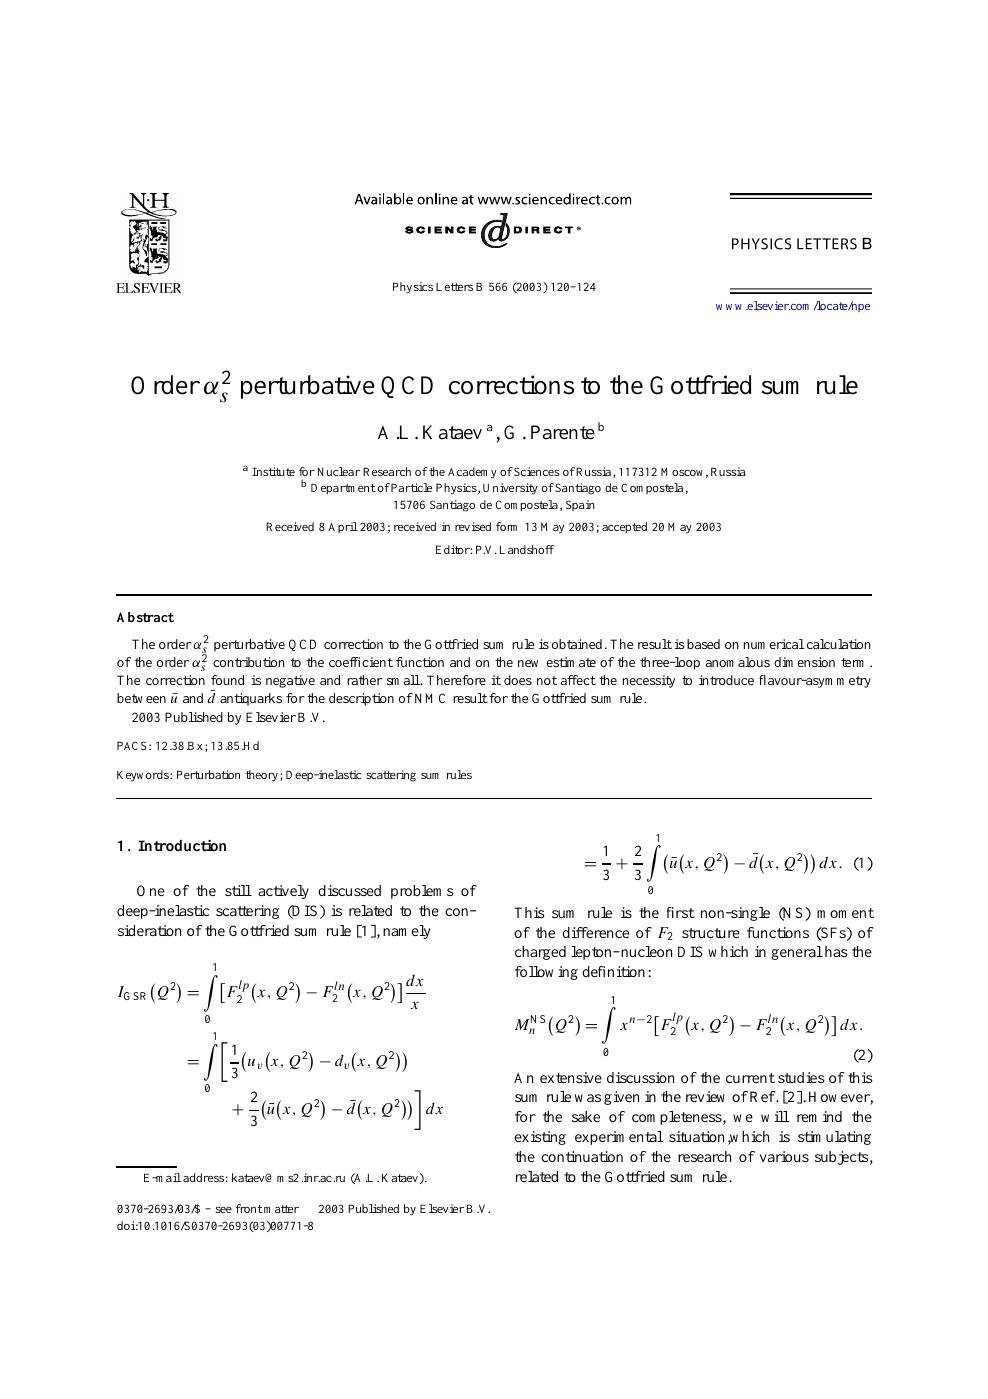 Order As2 Perturbative Qcd Corrections To The Gottfried Sum Rule Topic Of Research Paper In Physical Sciences Download Scholarly Article Pdf And Read For Free On Cyberleninka Open Science Hub